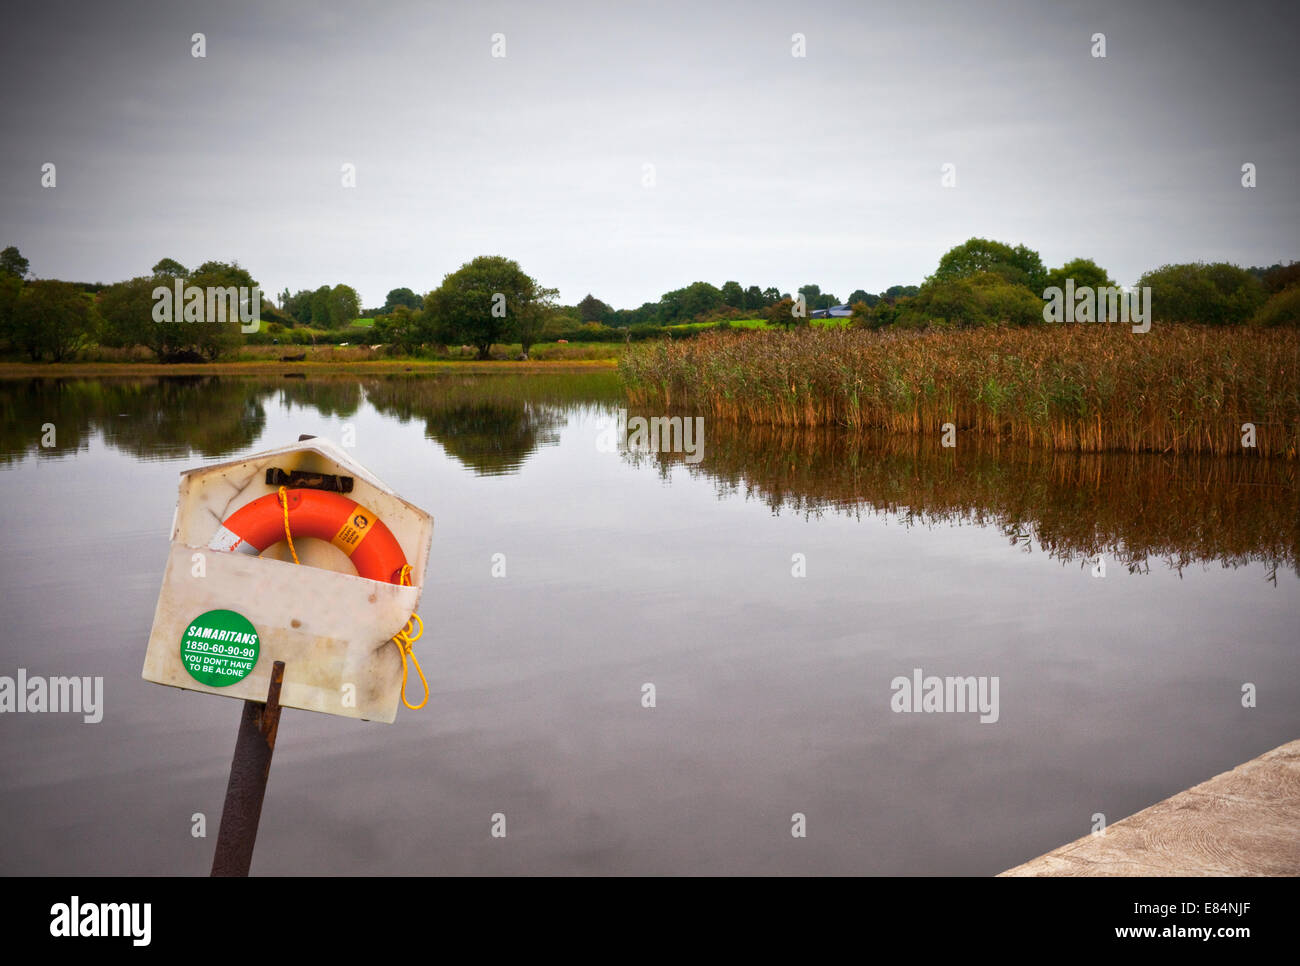 Lifebelt and sign for the Samaritans alongside a slipway into Lough MacNean, County Fermanagh, Northern Ireland Stock Photo